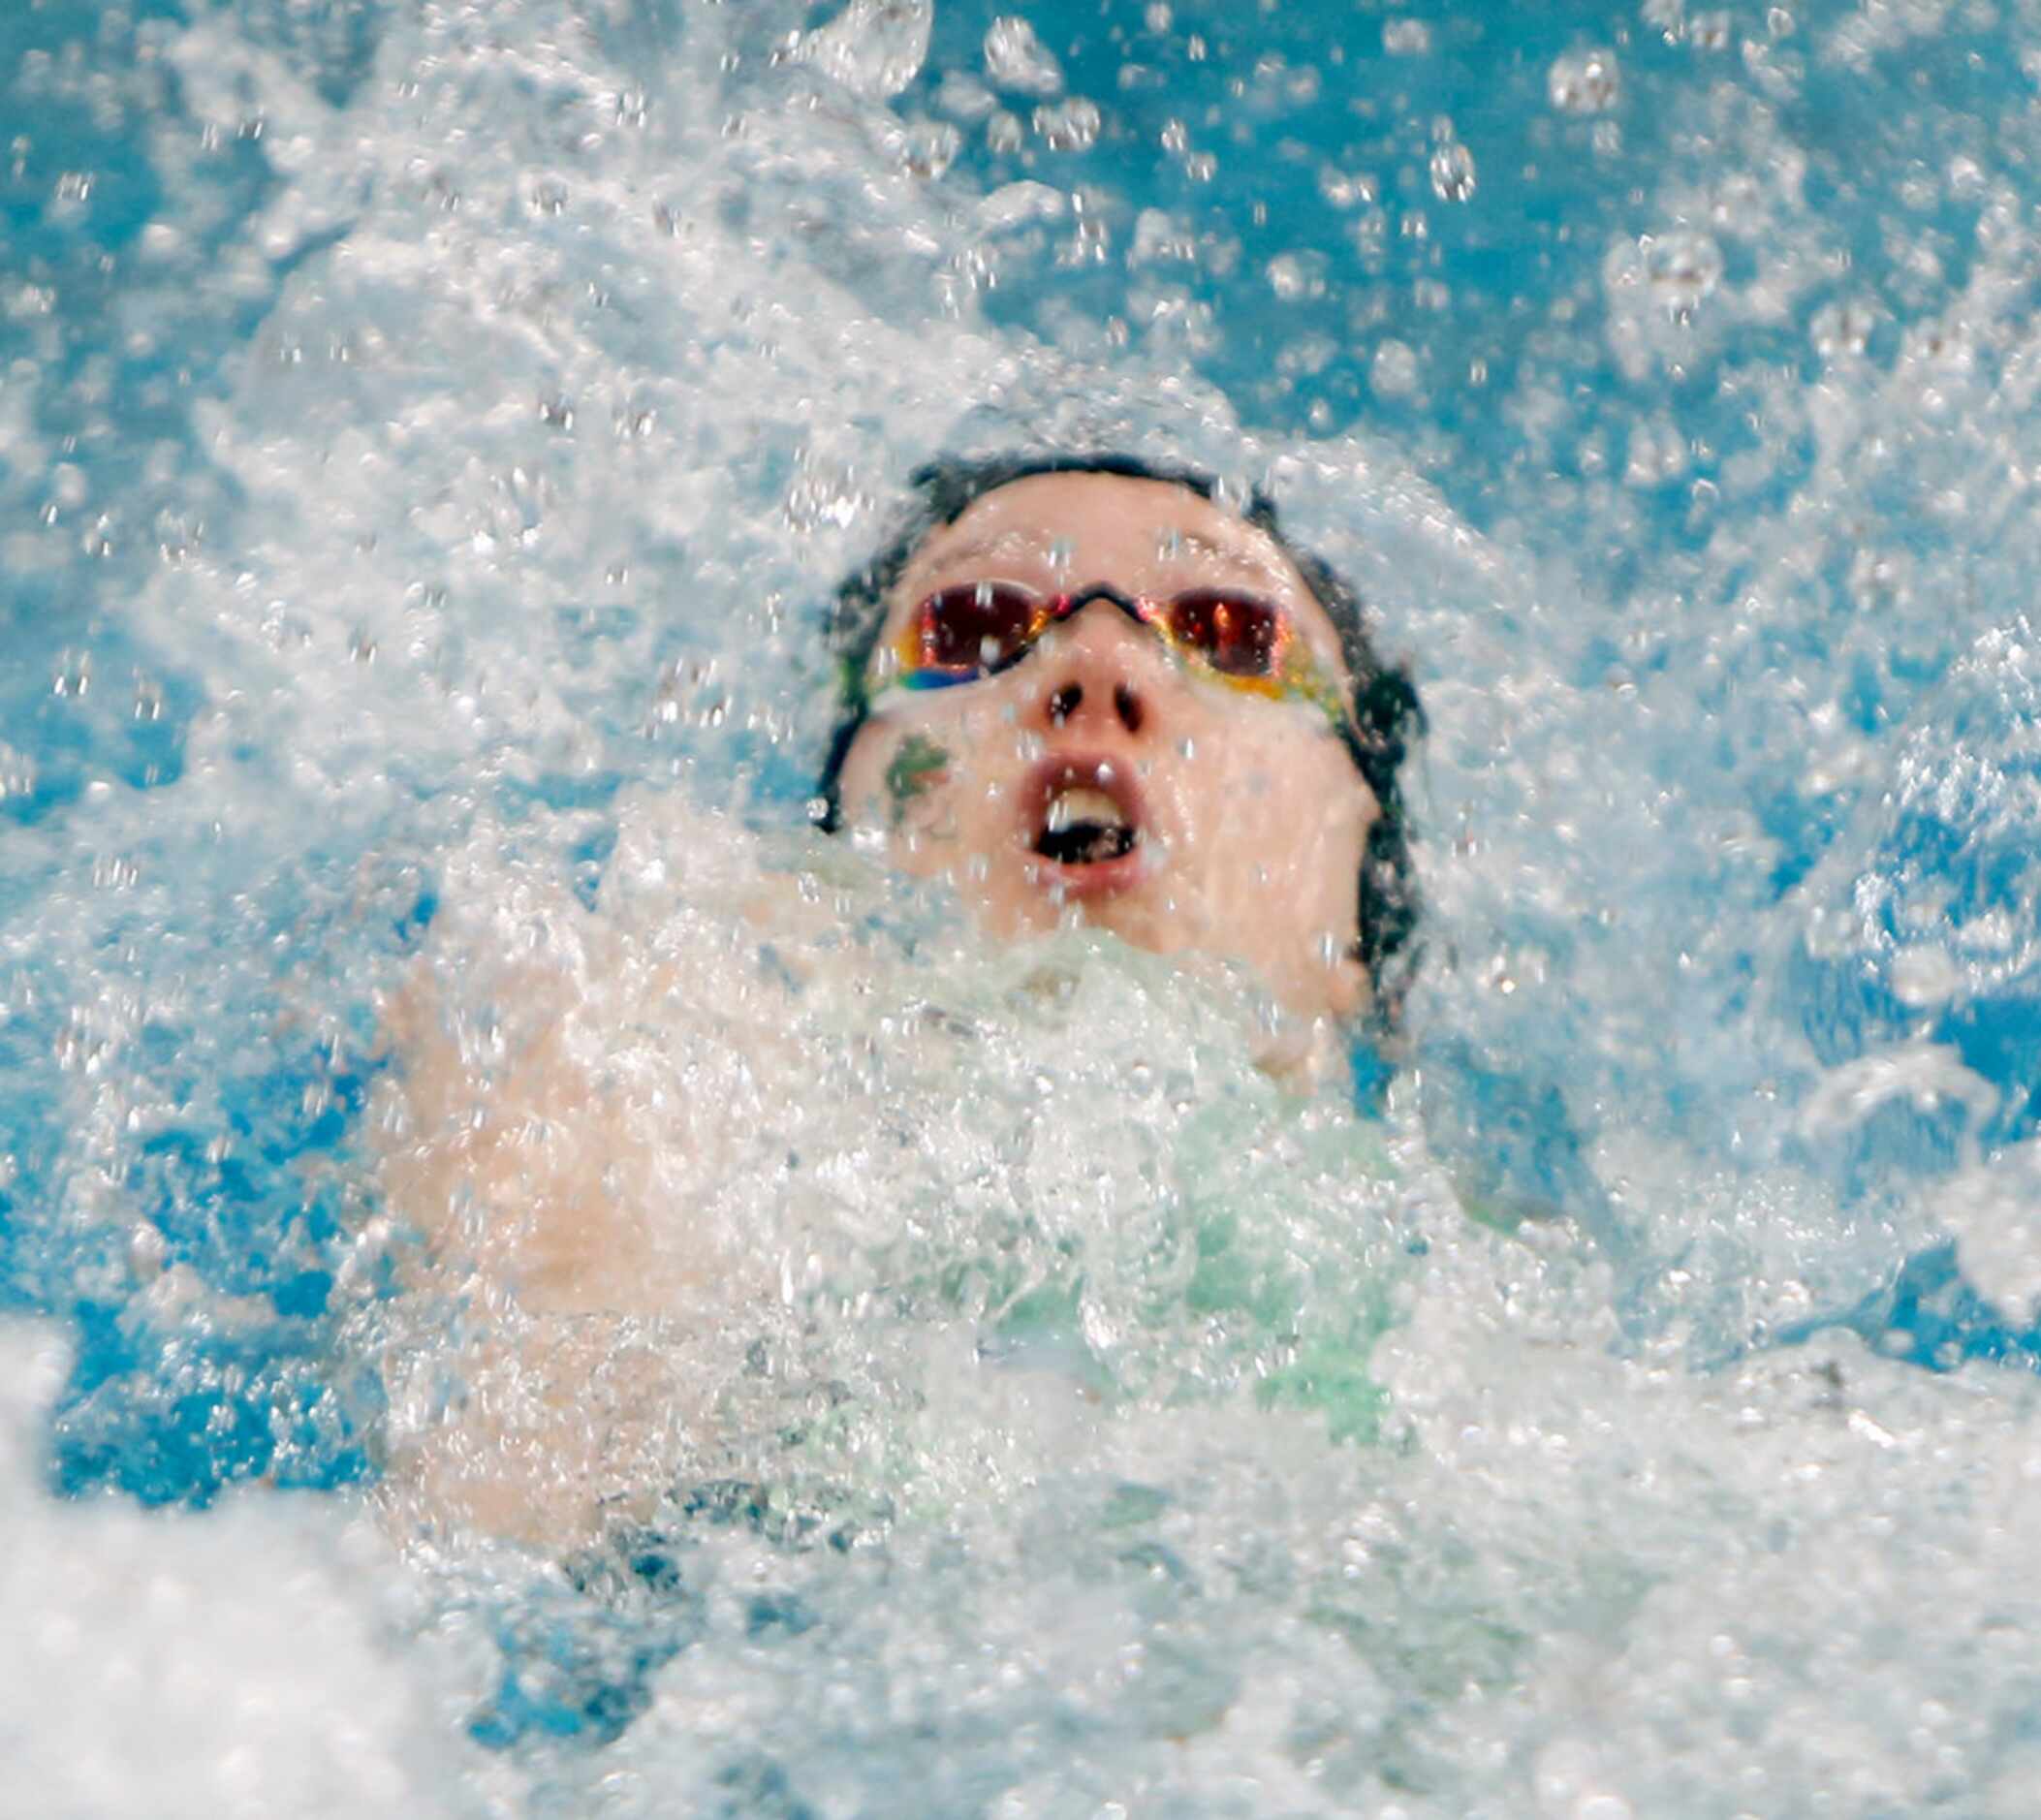 Southlake Carroll's Haley Hildebrand competes as the first leg of her school's 200 Yard...